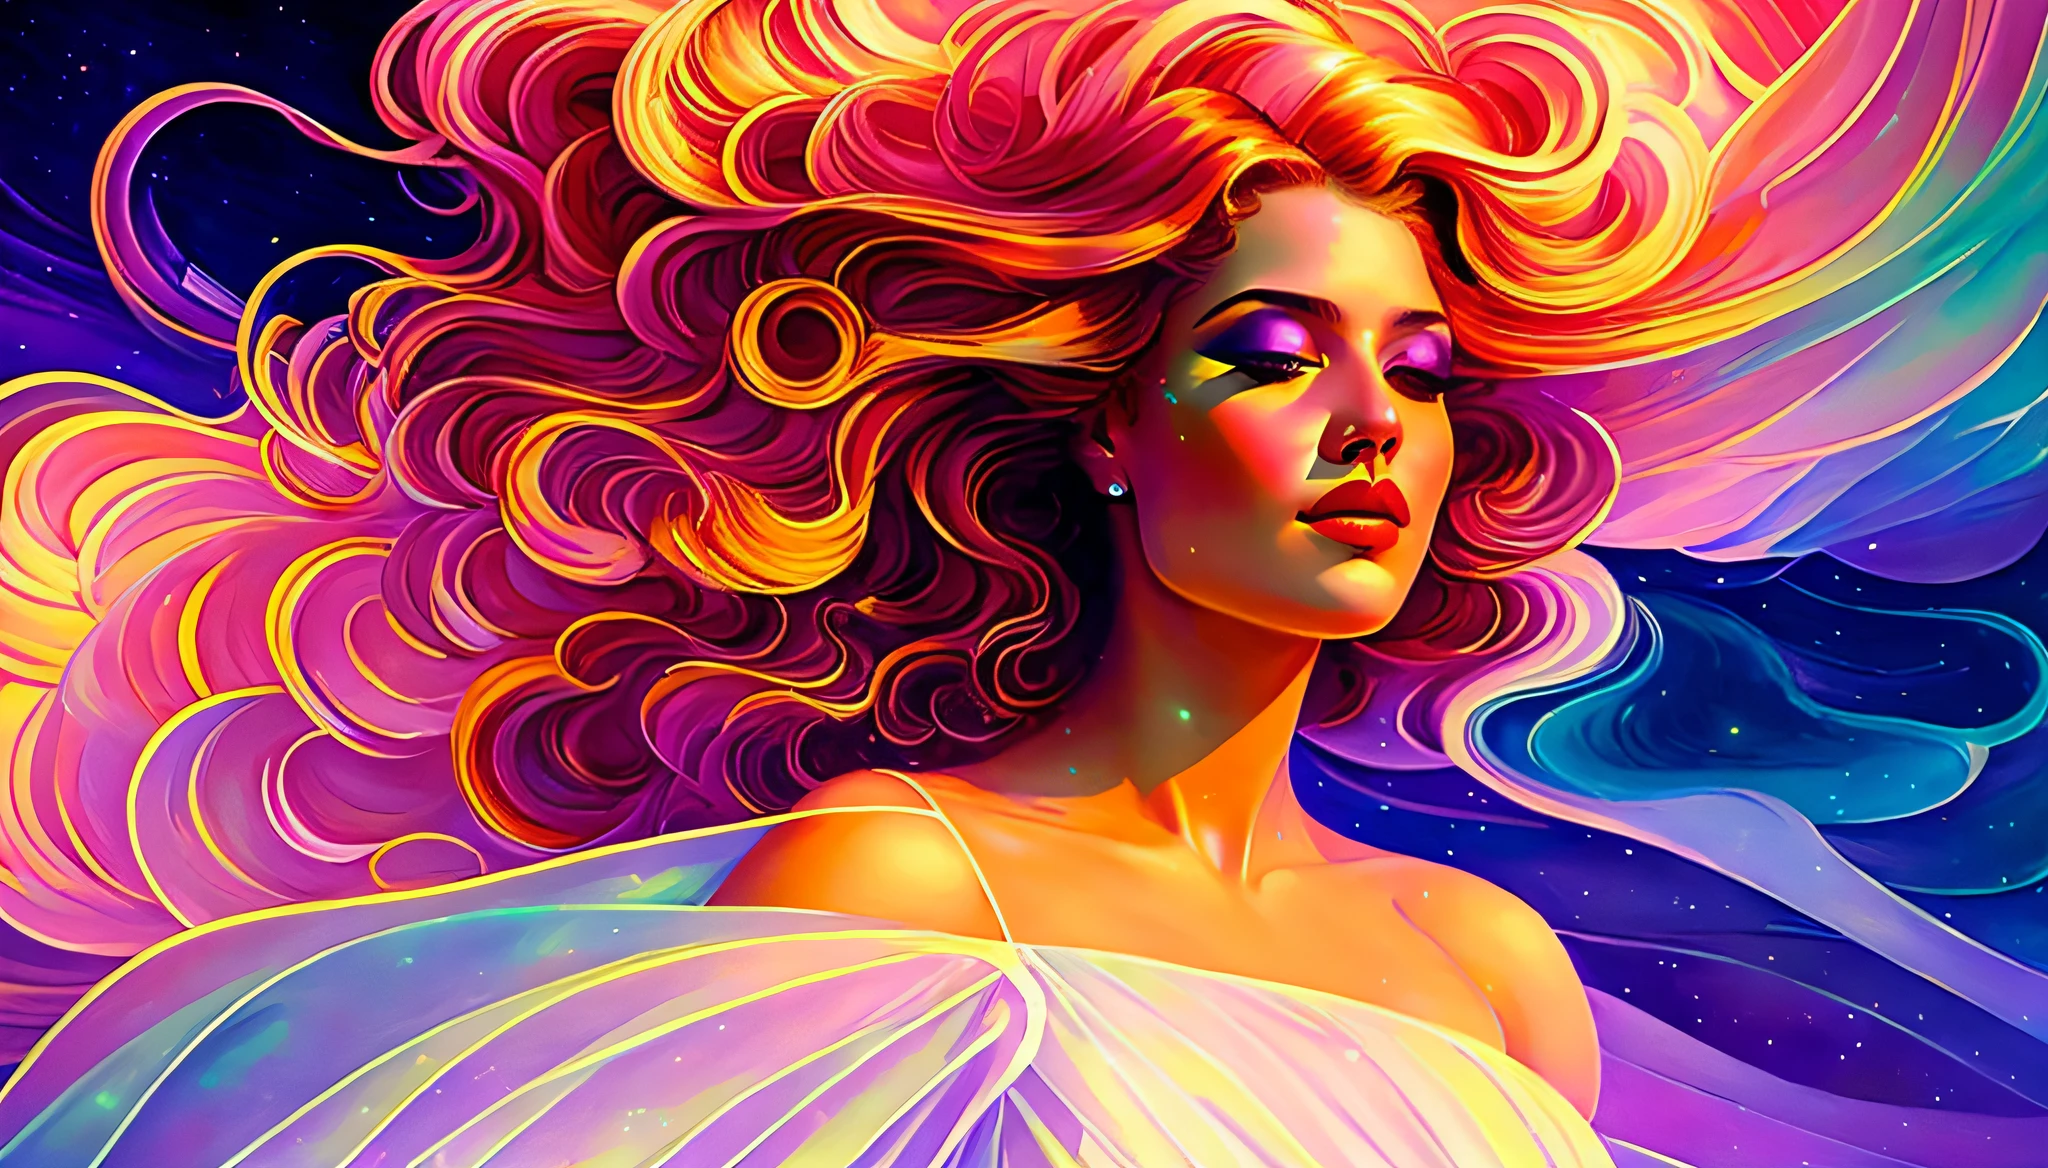 a celestial angel concert by W Elvgren Ross and Laurie Greasley oil painting emily poulmus wearing flowing summer dress greg staples eyes colorful pastel lighting plastic sheet concept artwork multiple medium distant thick spike smoke